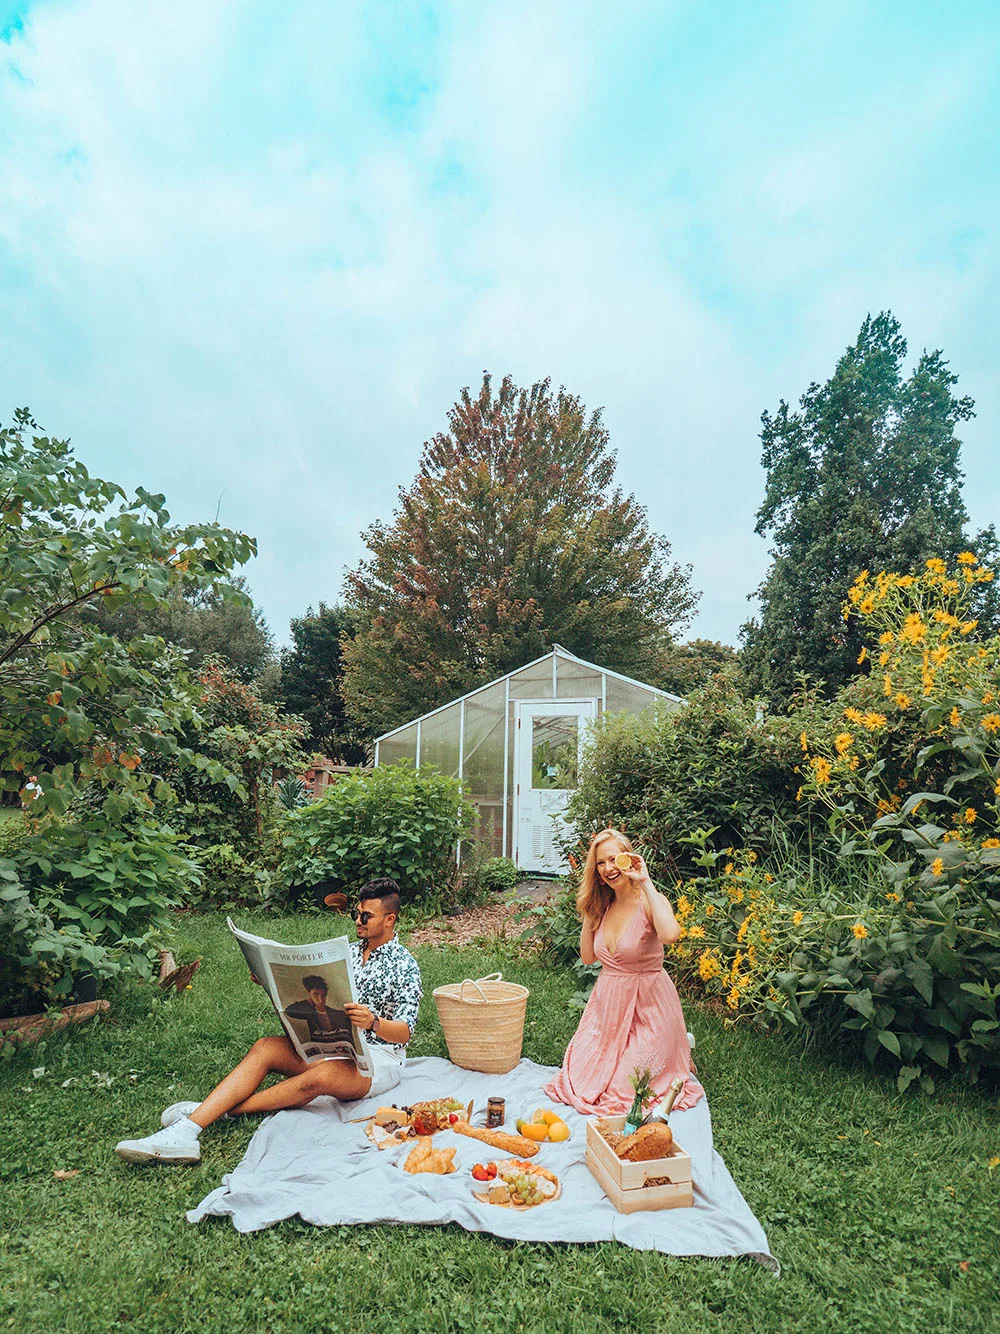 Looking for an incredible place to enjoy your next picnic in Toronto? This guide features some of the best picnic spots in Toronto from a local's perspective. Whether you're looking to picnic in a park, to spend your day sunning and snacking on a beach, prefer a garden hang, or want to check out a more unique destination, this guide has all of the best picnic spots for you to choose from. Pictured here: Trinity Bellwoods Park